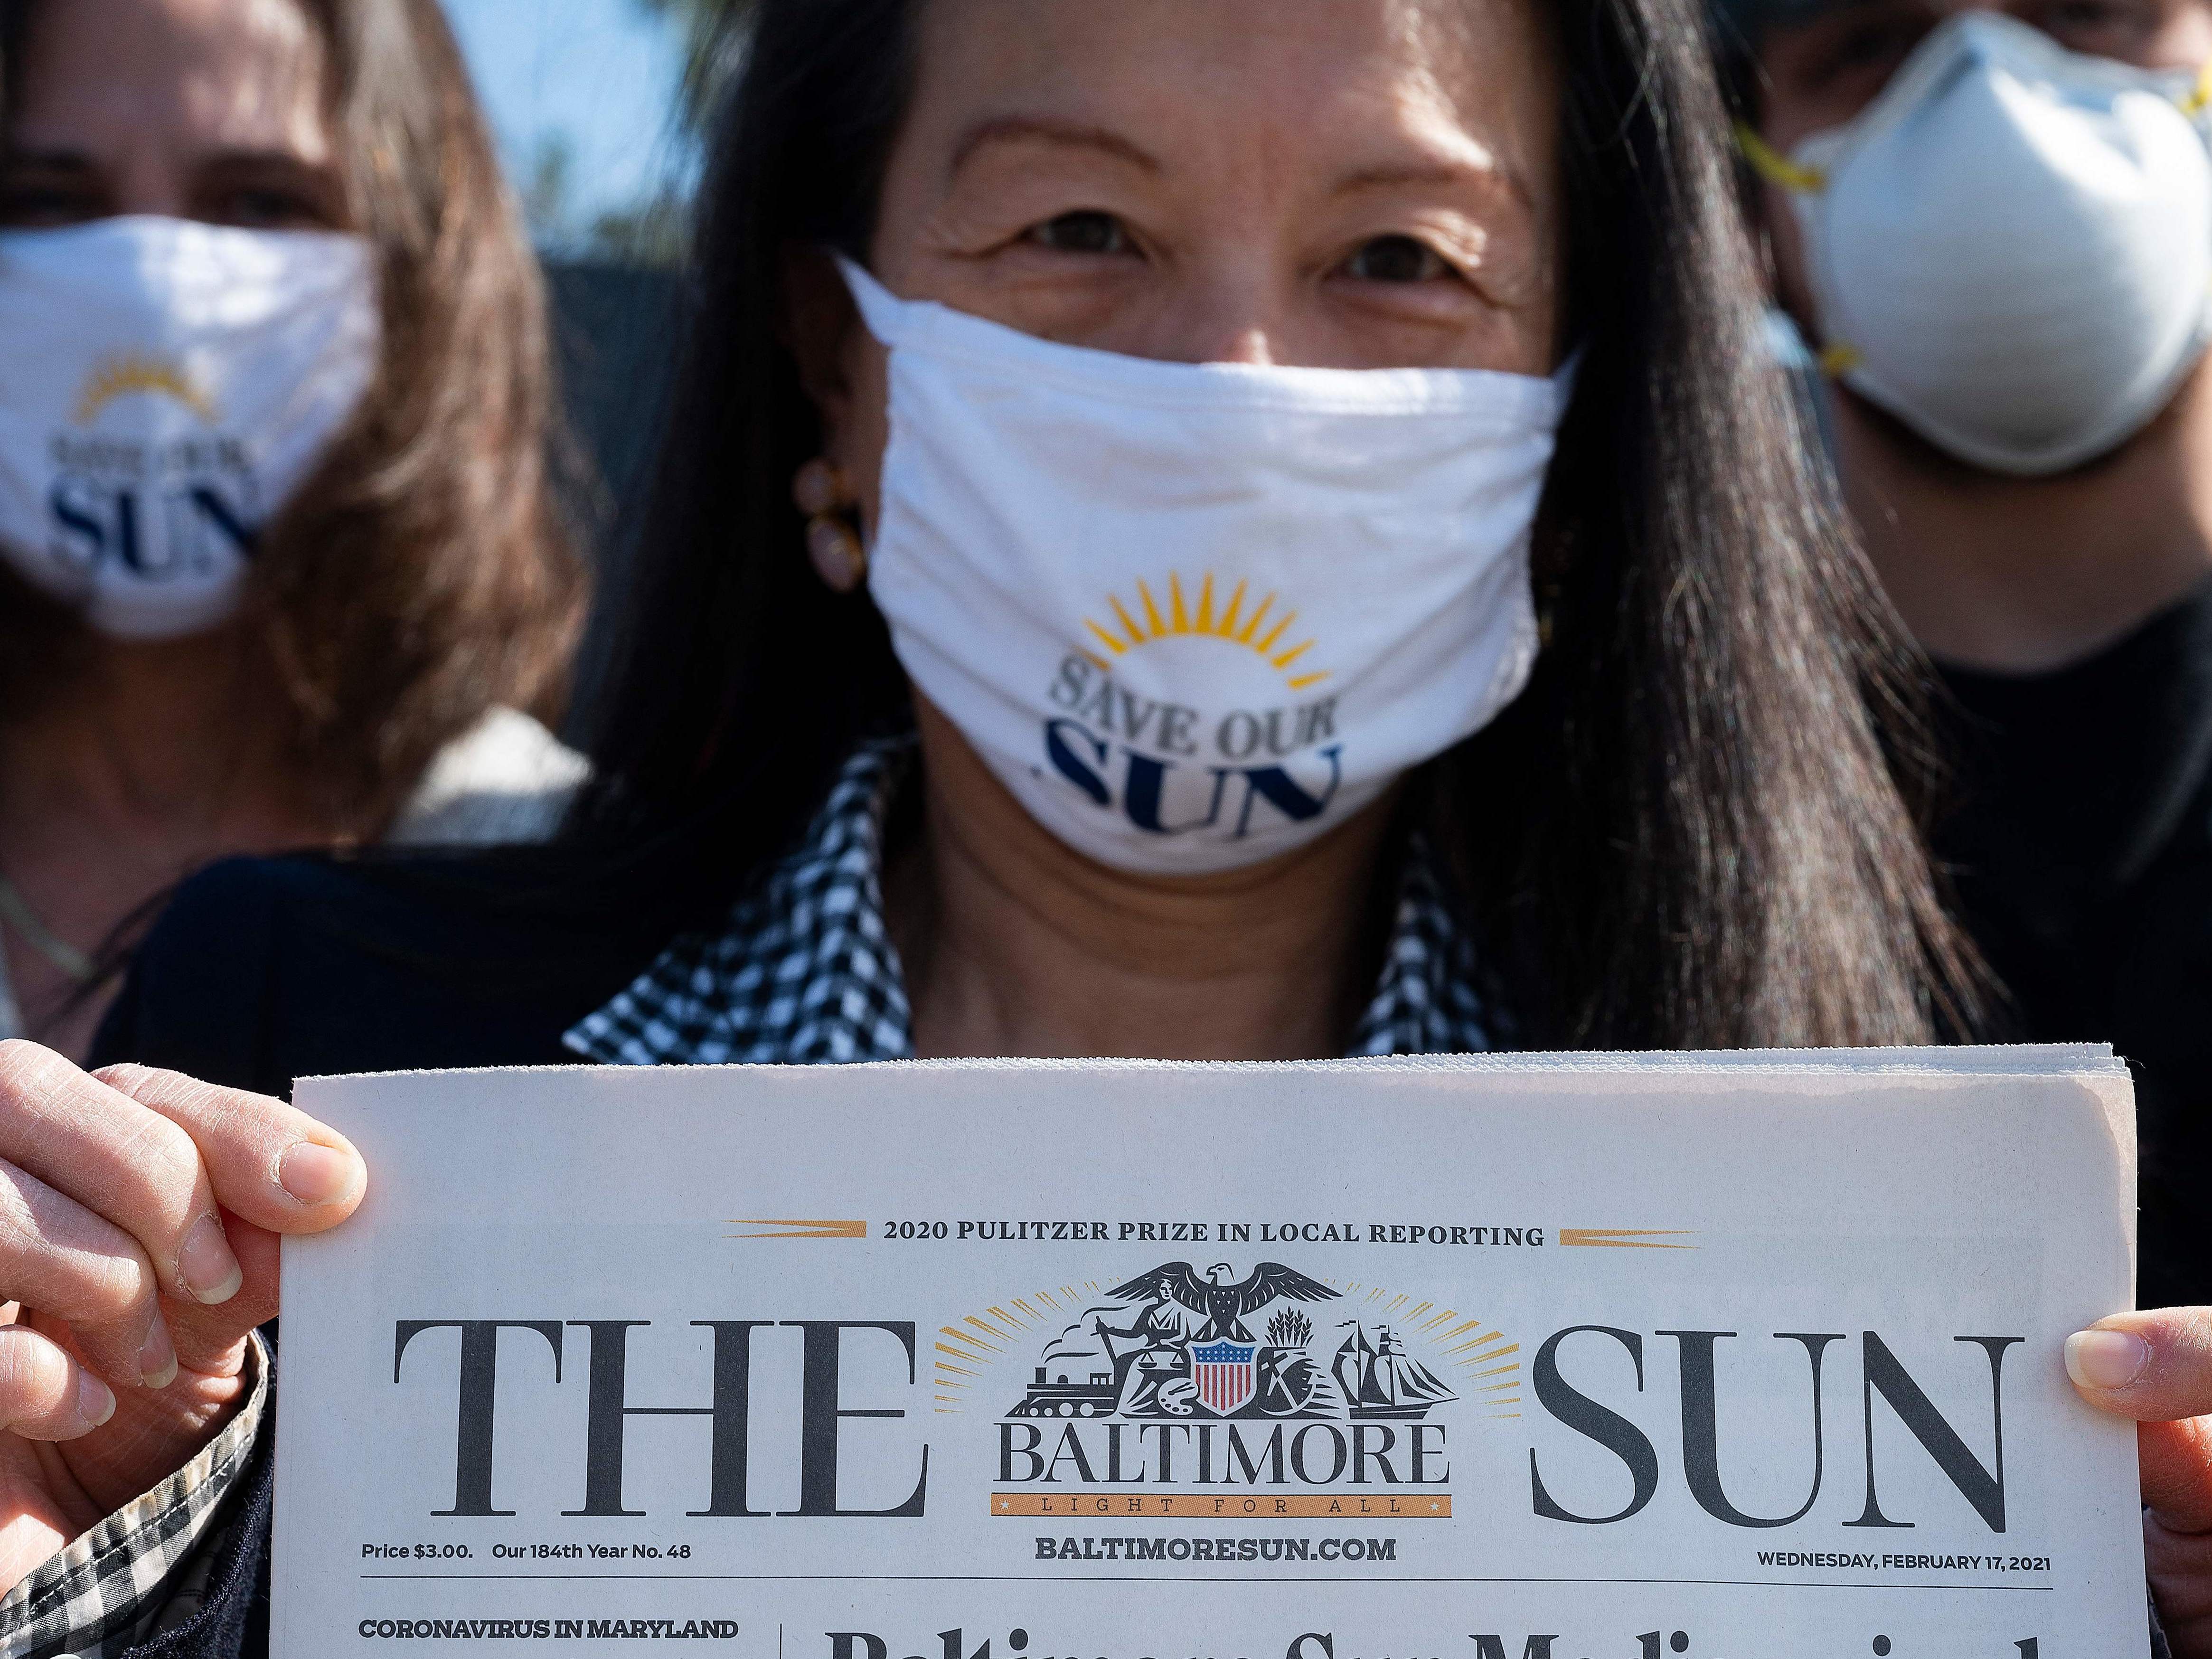 Baltimore Sun reporter Jean Marbella participated in a Save Our Sun rally in March, part of an effort to secure an alternative buyer to Alden Global CREDIT: JIM WATSON/AFP via Getty Images